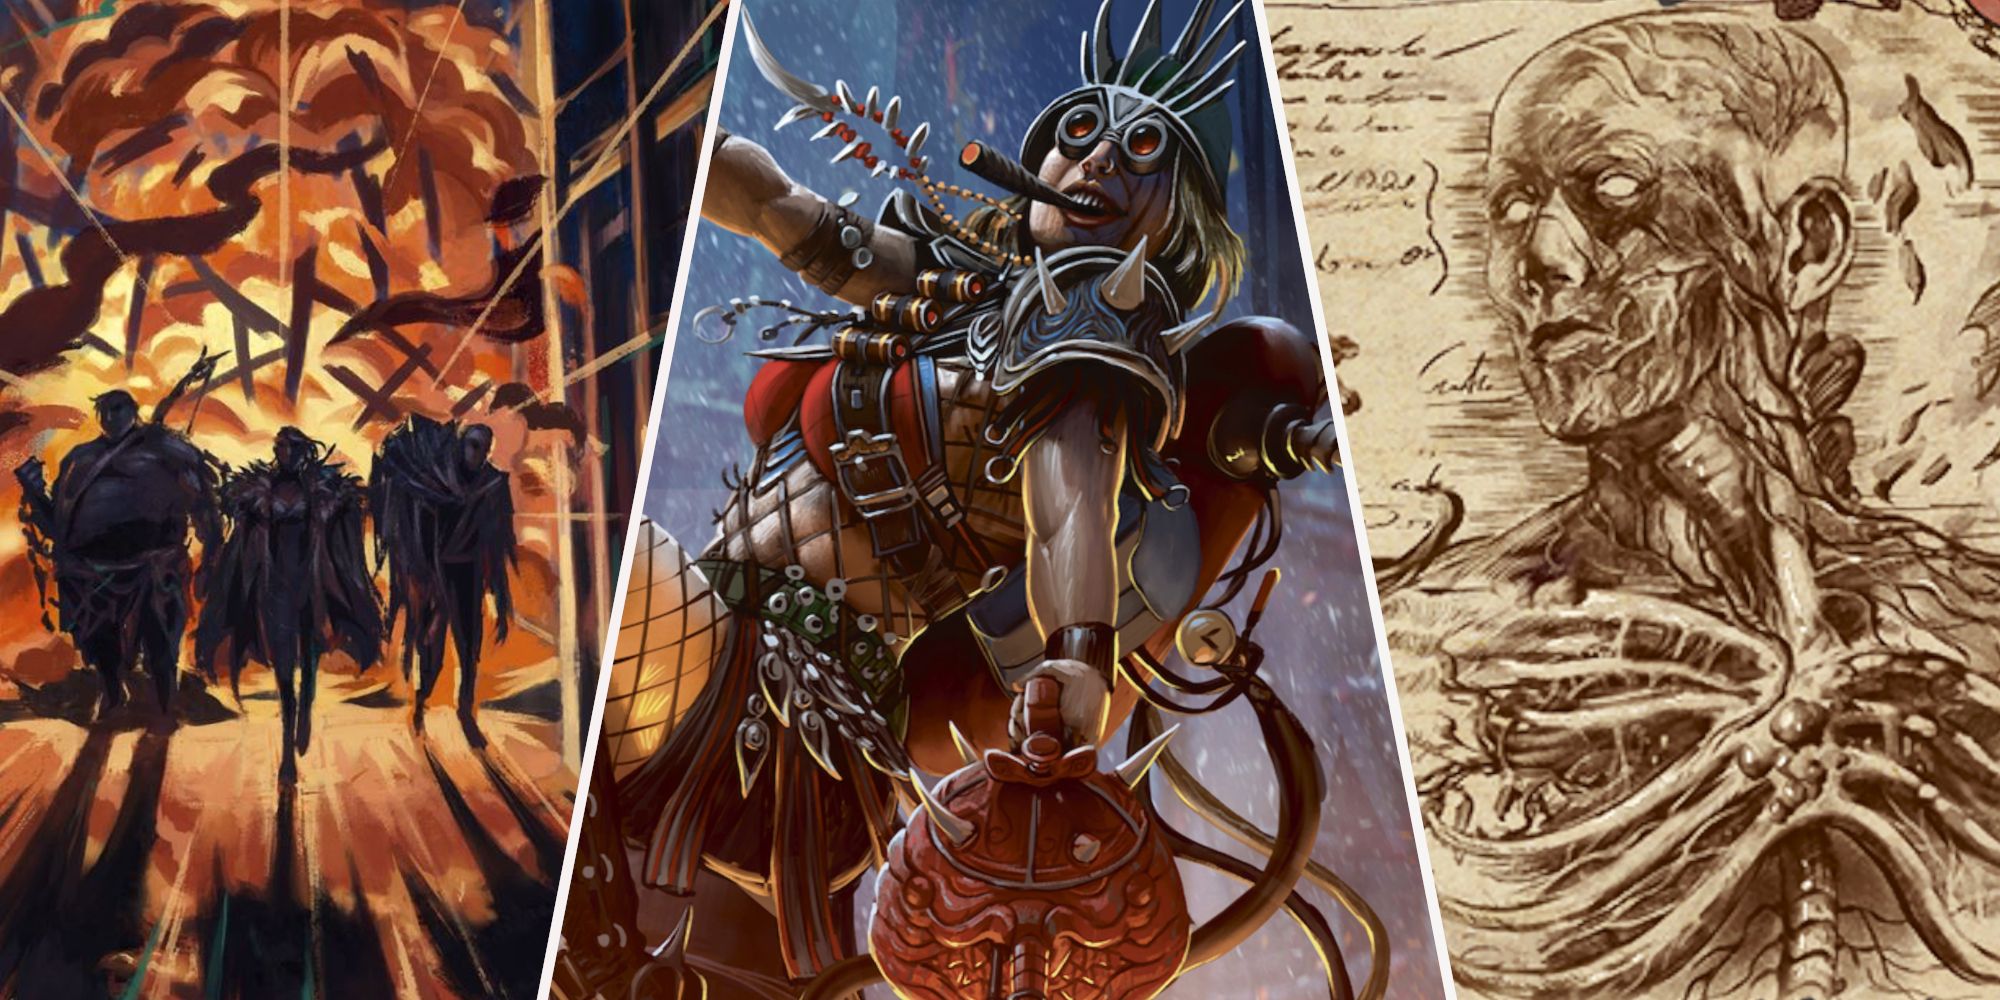 Outsiders Promo Art, Wreck Havoc Card Art, Codex Of Frailty Card Art From Left To Right